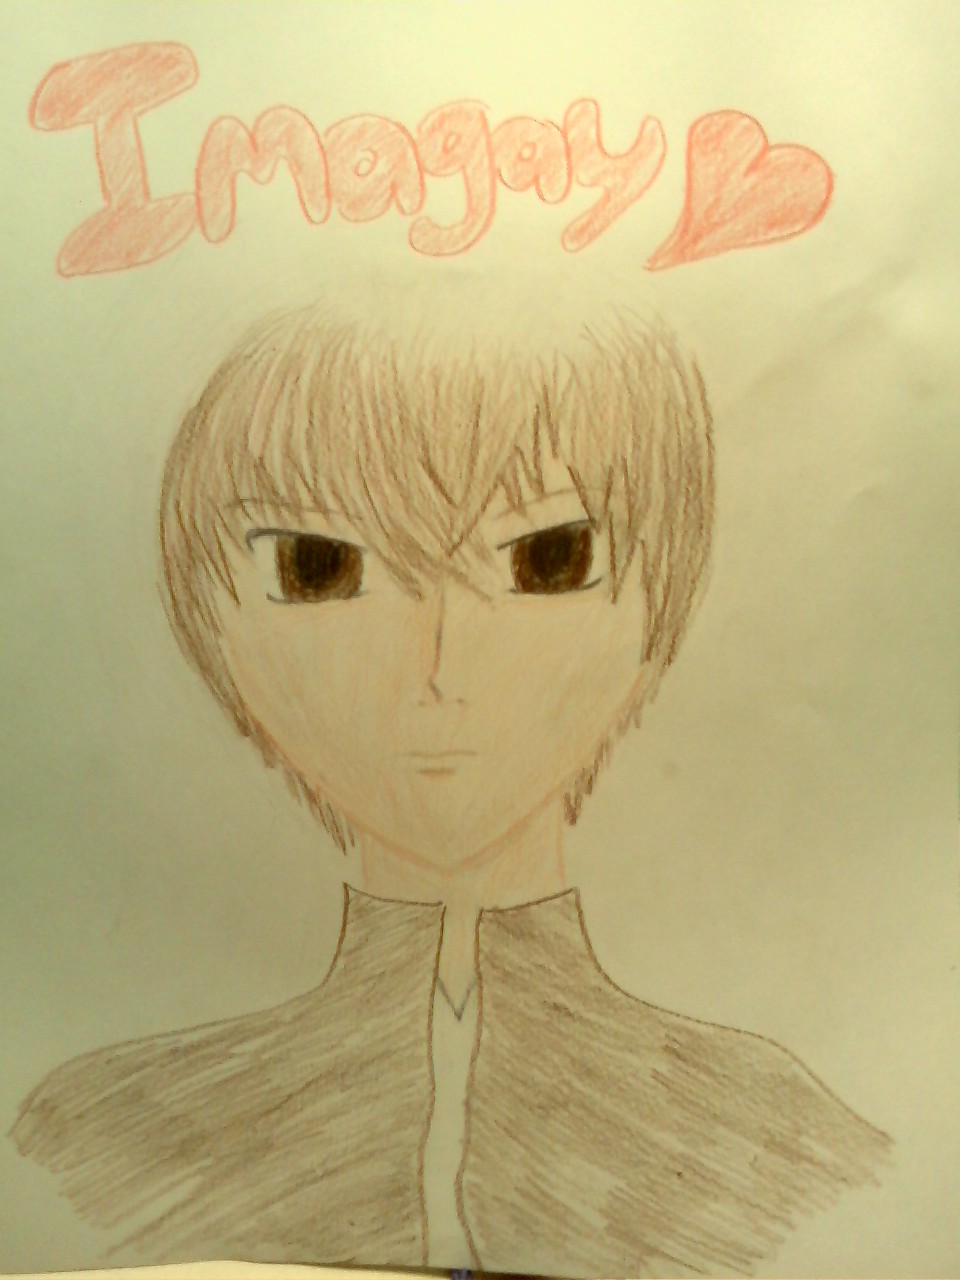 Light Yagami by idoodle